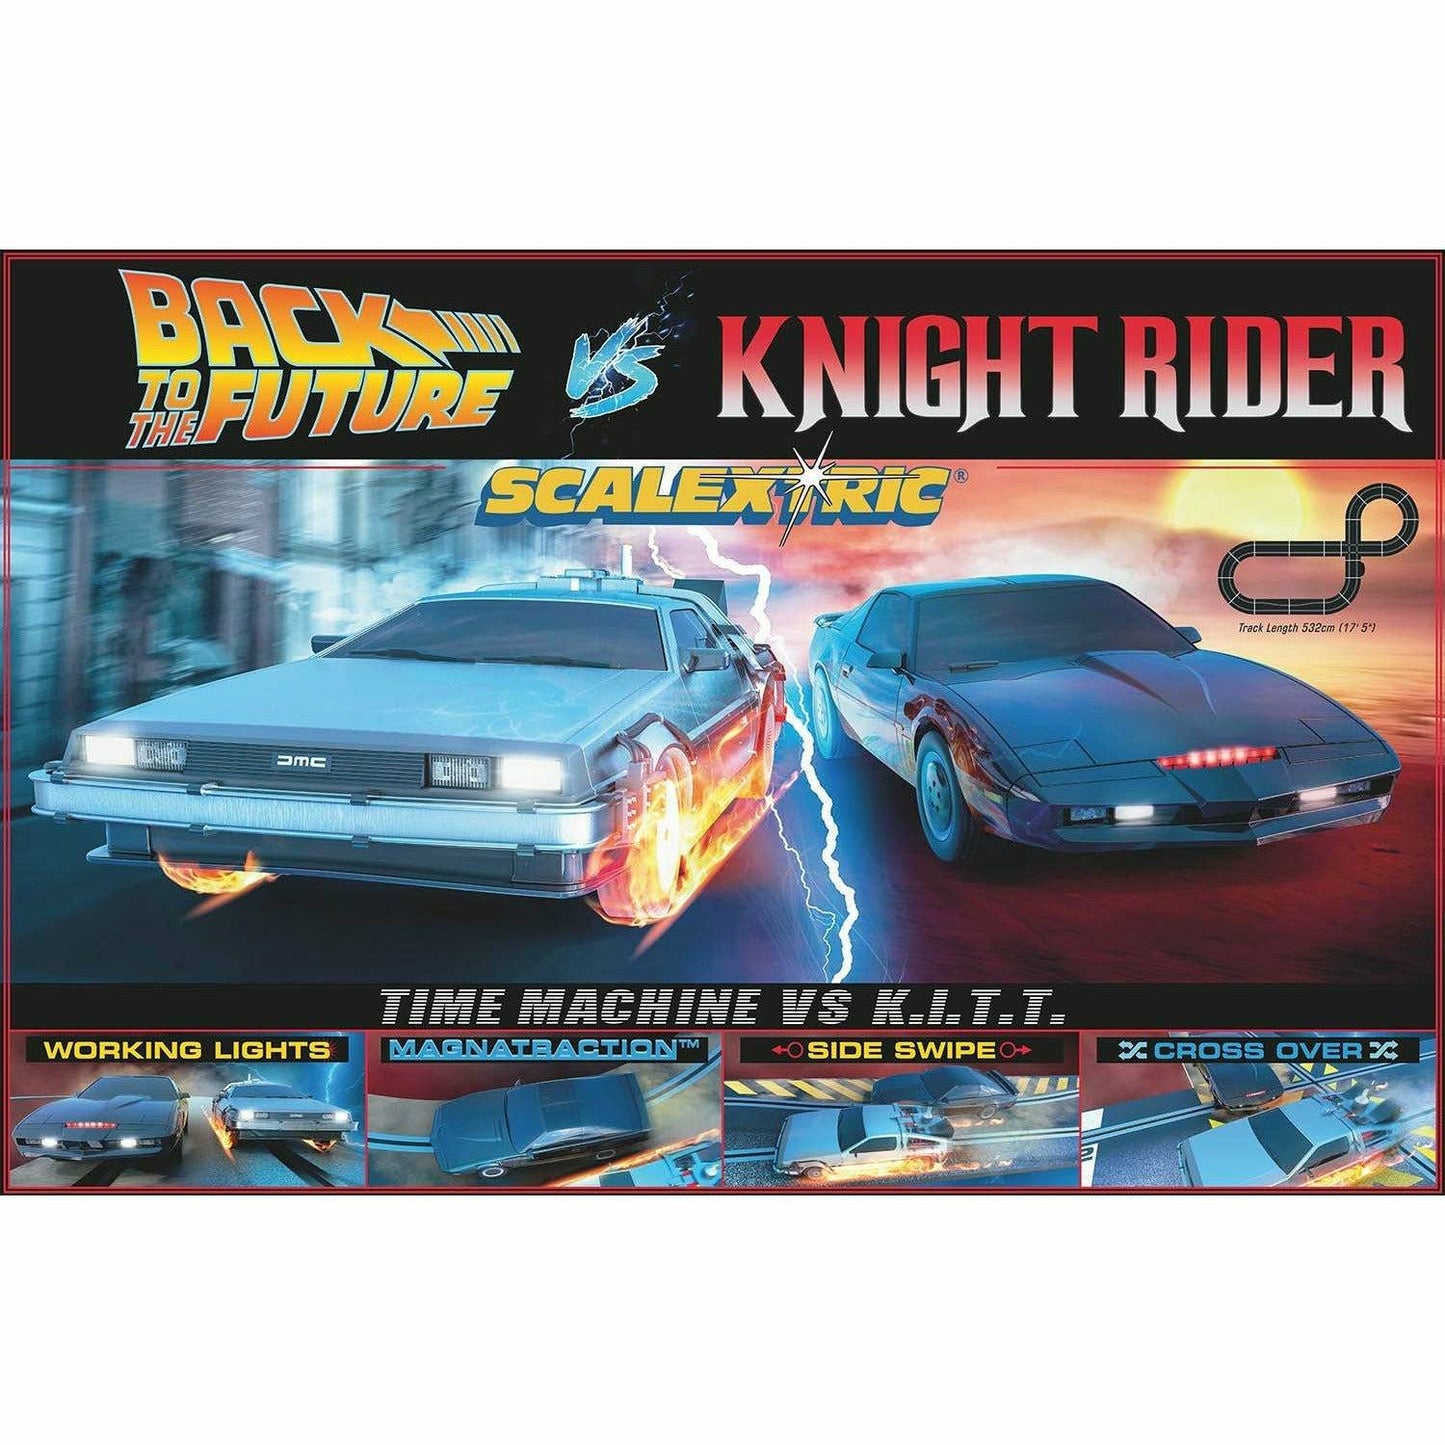 Scalextric 1980's TV - Back to the Future vs Knight Rider 1:32 scale slot car race set Slot Car Scalextric